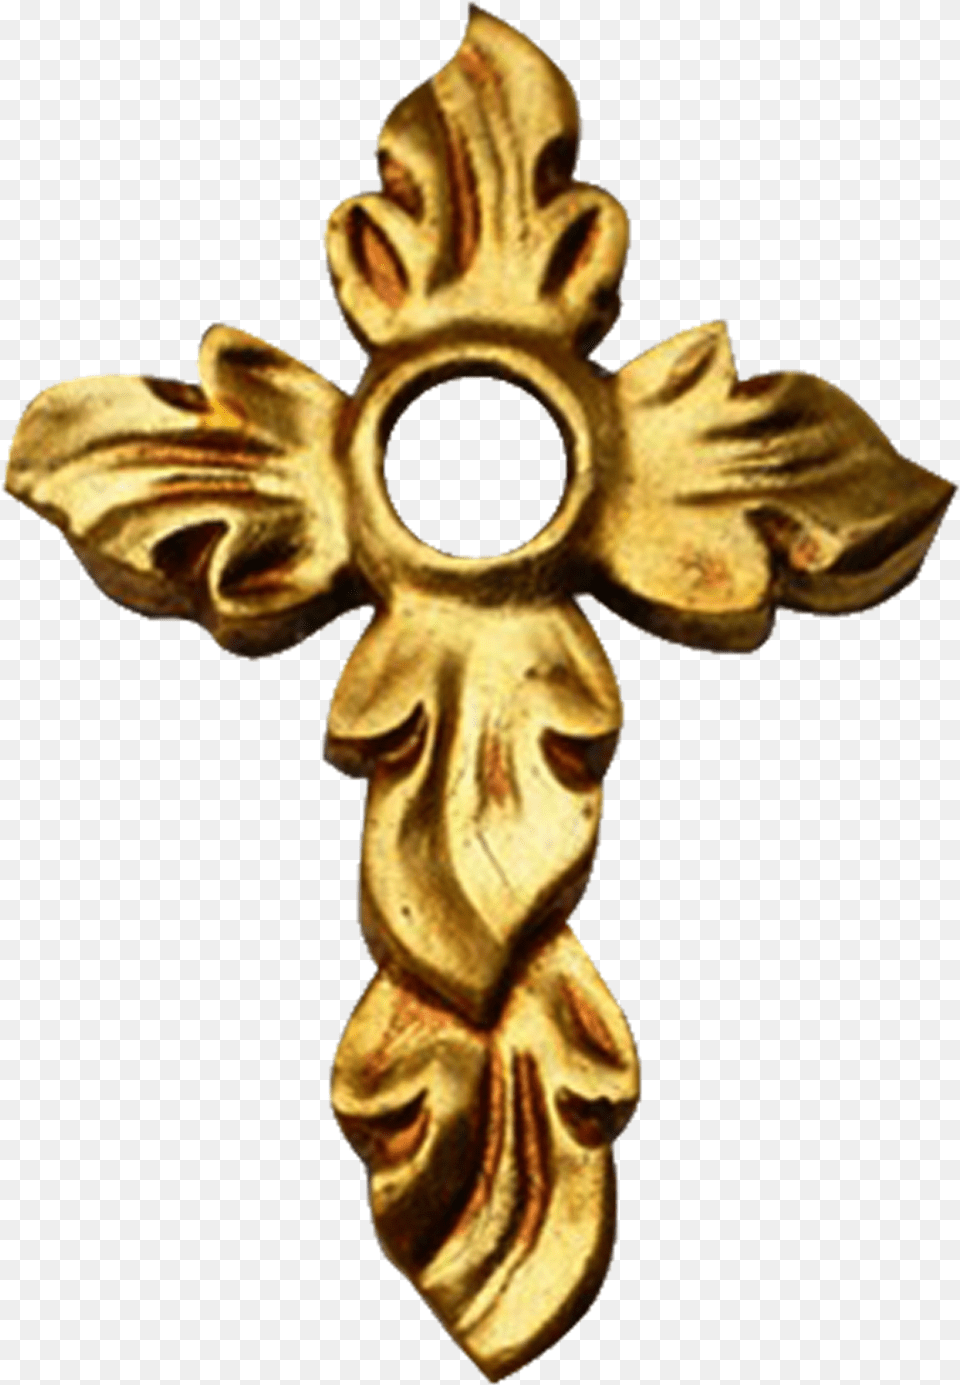 Golden Cross Fire Style With Center Hole Transparent Background Golden Cross, Accessories, Bronze, Symbol, Treasure Free Png Download